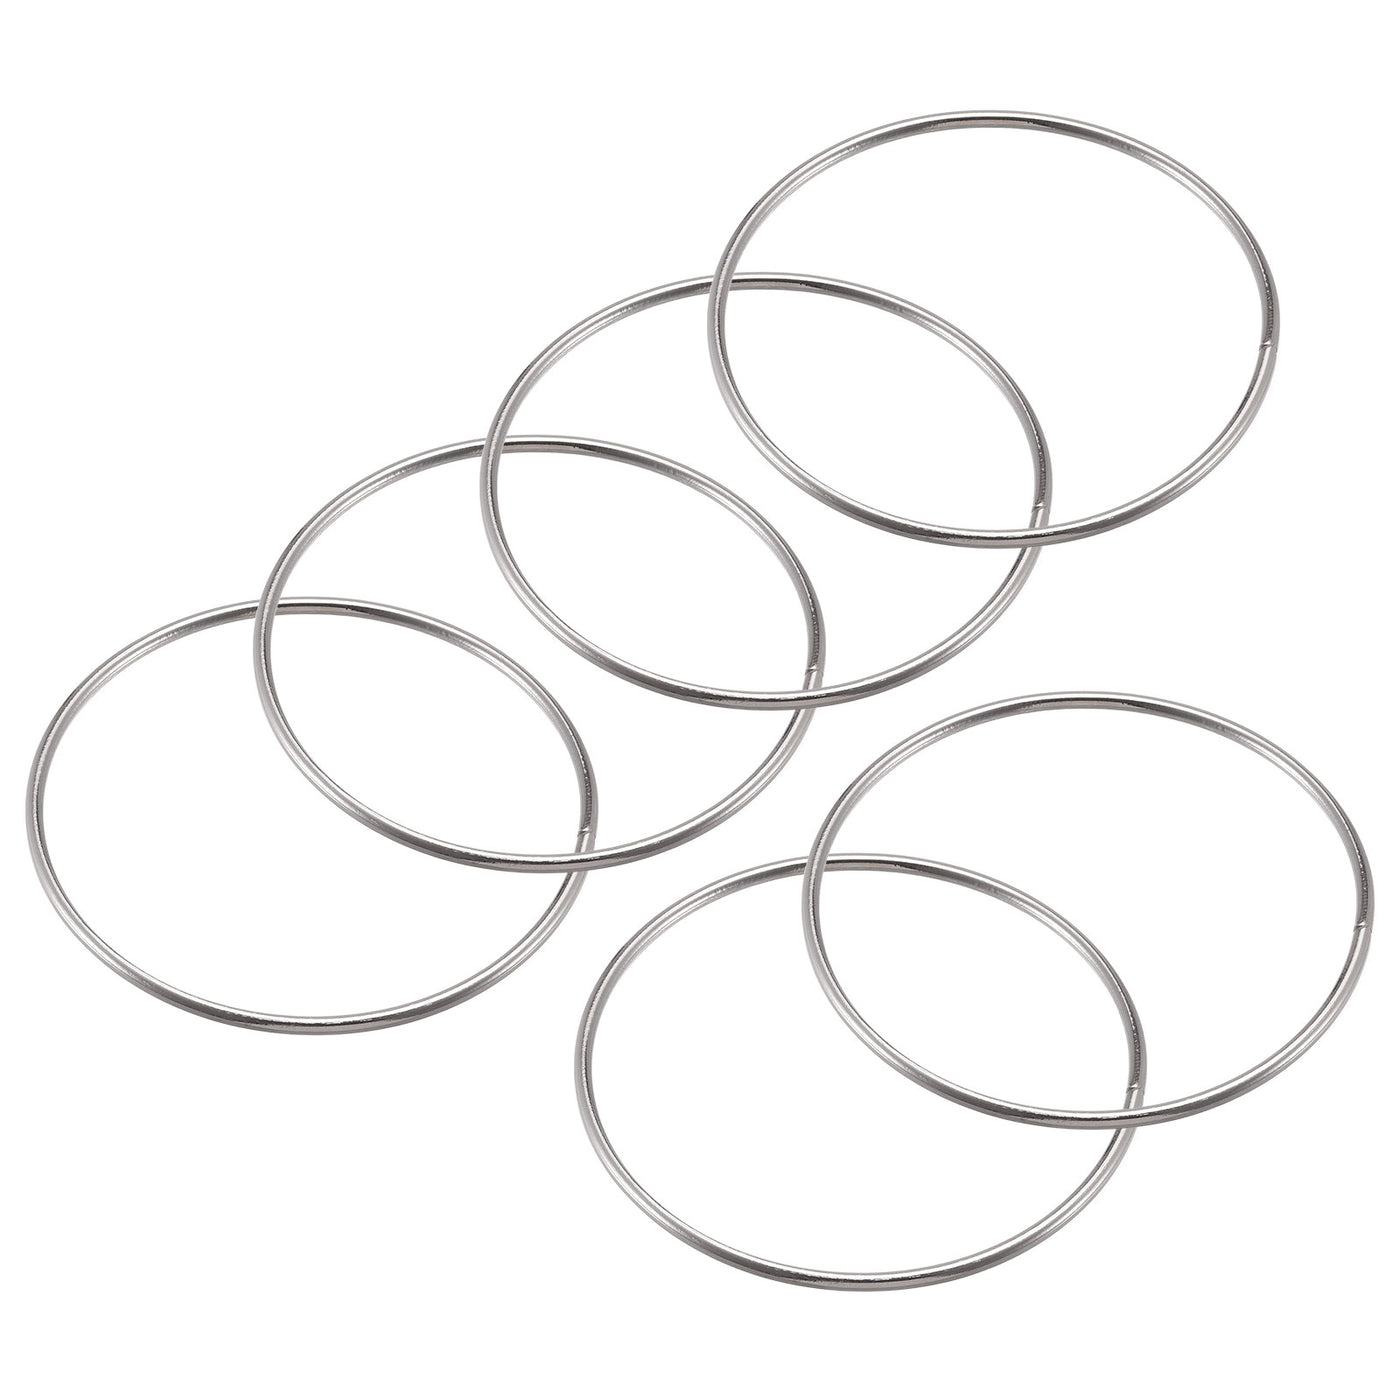 uxcell Uxcell 80mm(3.15") OD Metal O Ring Non-Welded Craft Hoops for DIY Silver Tone 6pcs